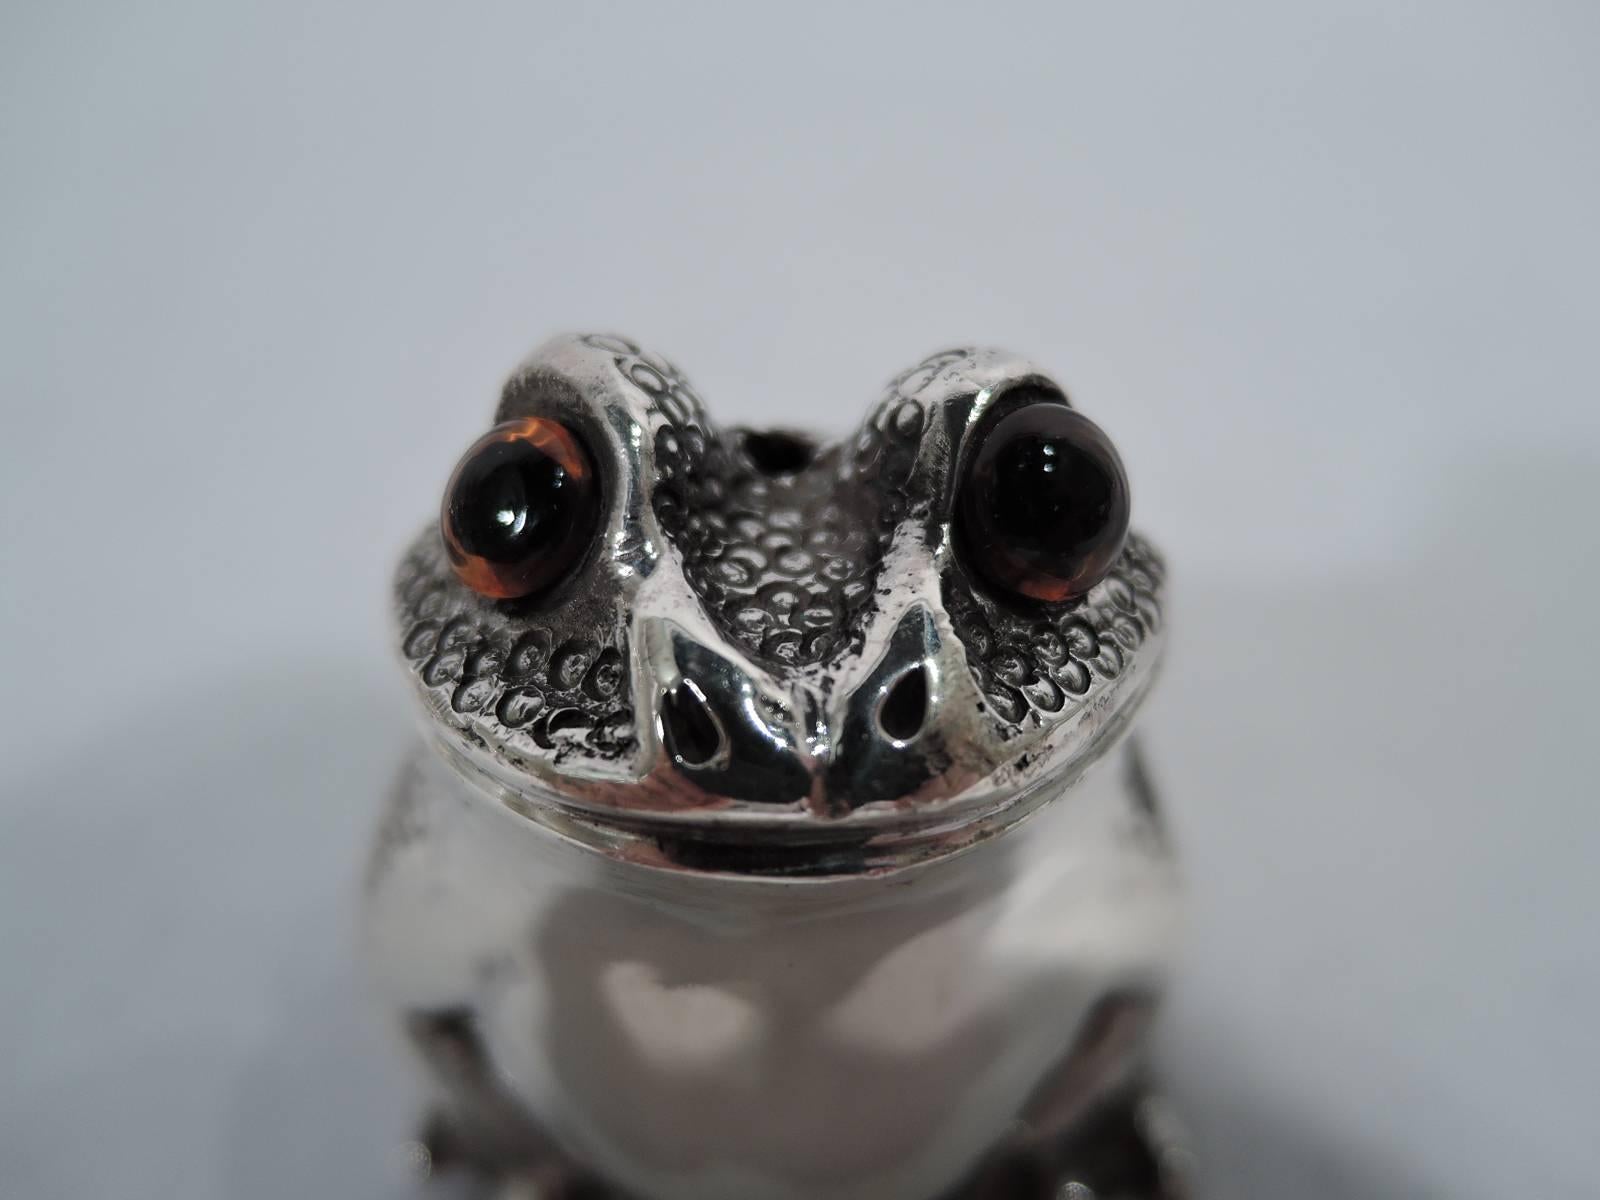 Modern Pair of English Sterling Silver Novelty Frog Salt and Pepper Shakers